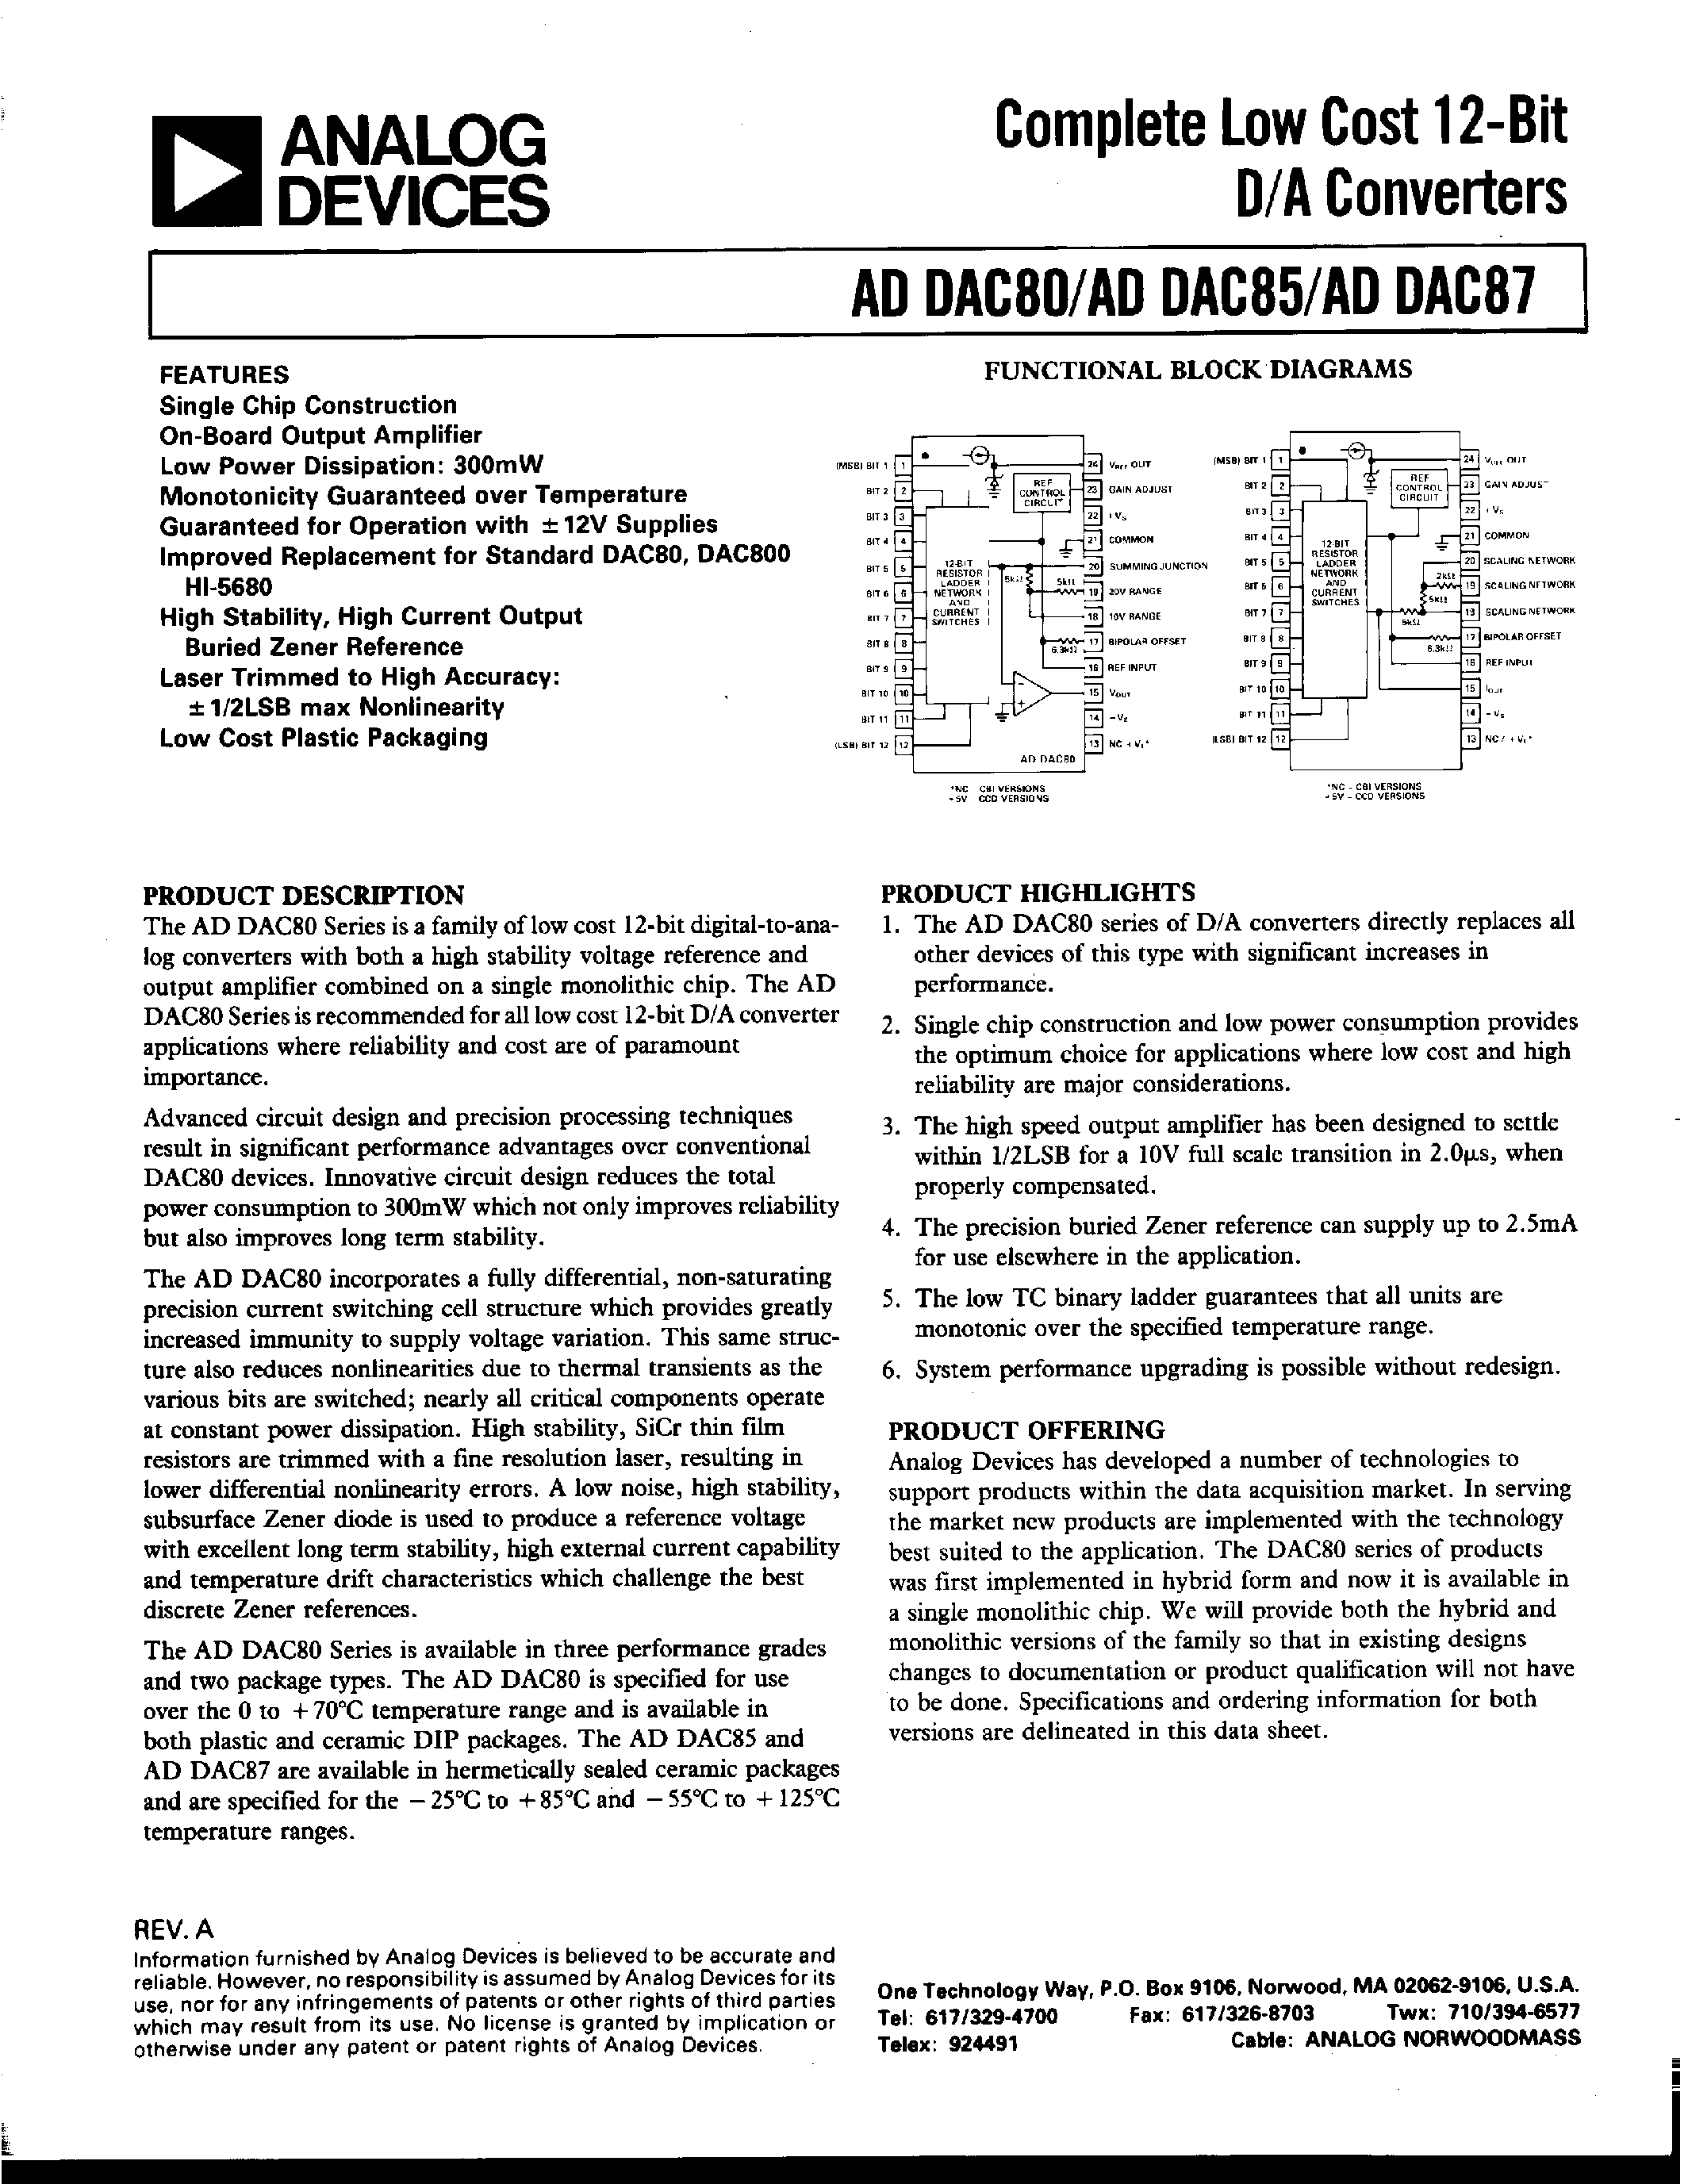 Datasheet ADDAC87-CBI-I - COMPLETE LOW COST 12-BIT D/A CONVERTERS page 1